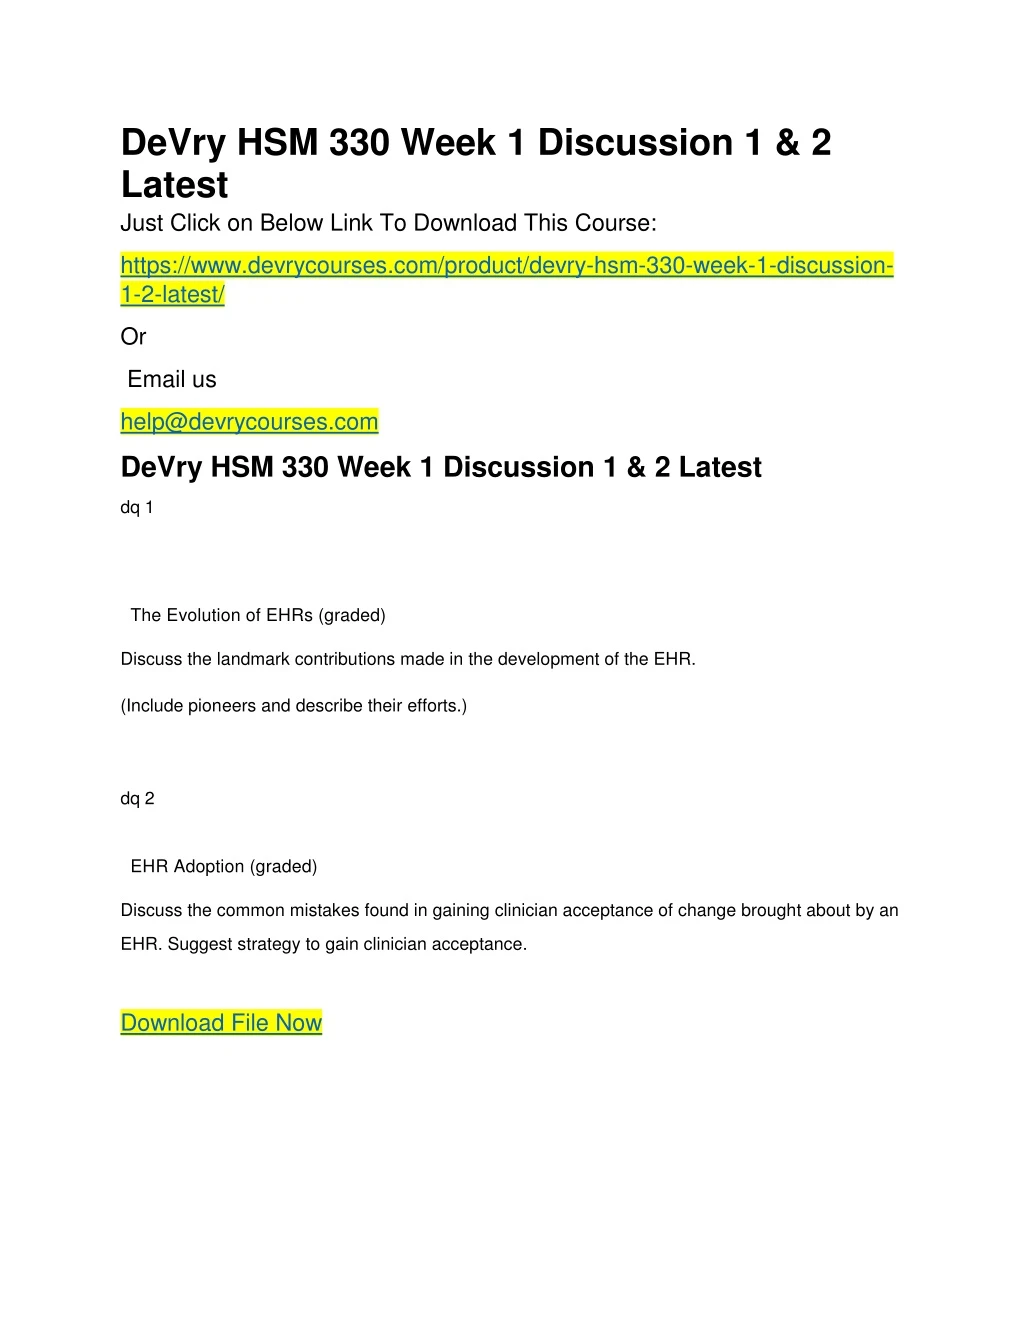 devry hsm 330 week 1 discussion 1 2 latest just